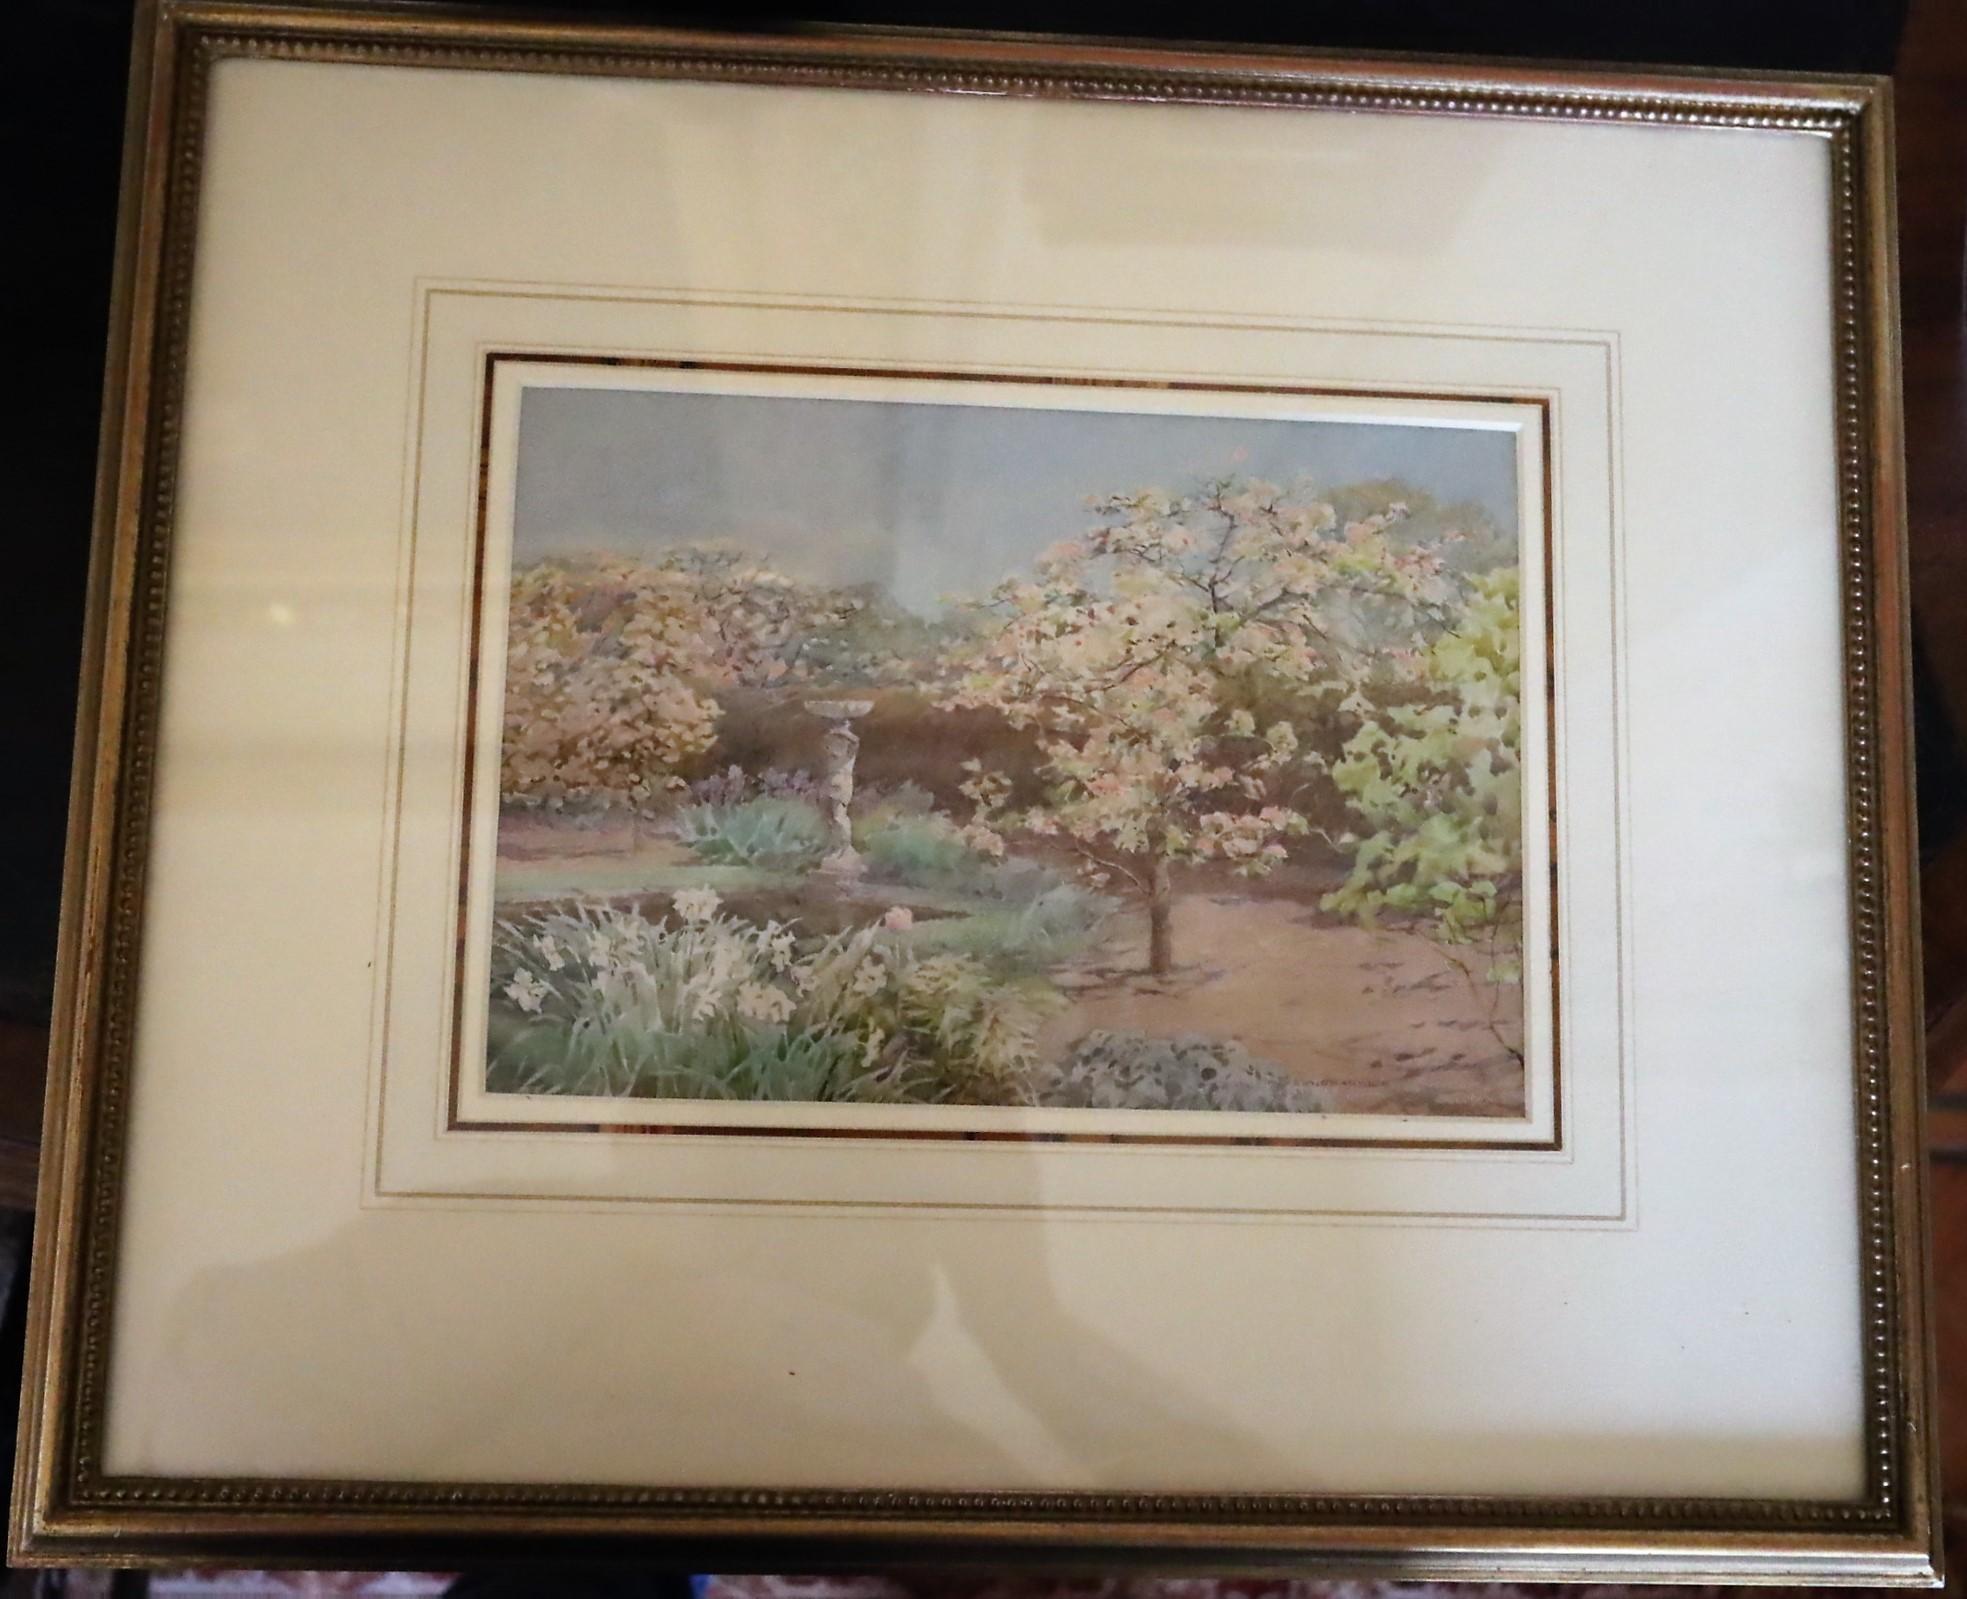 Trees in Blossom Beside a Pond - Art by Ernest Albert Chadwick